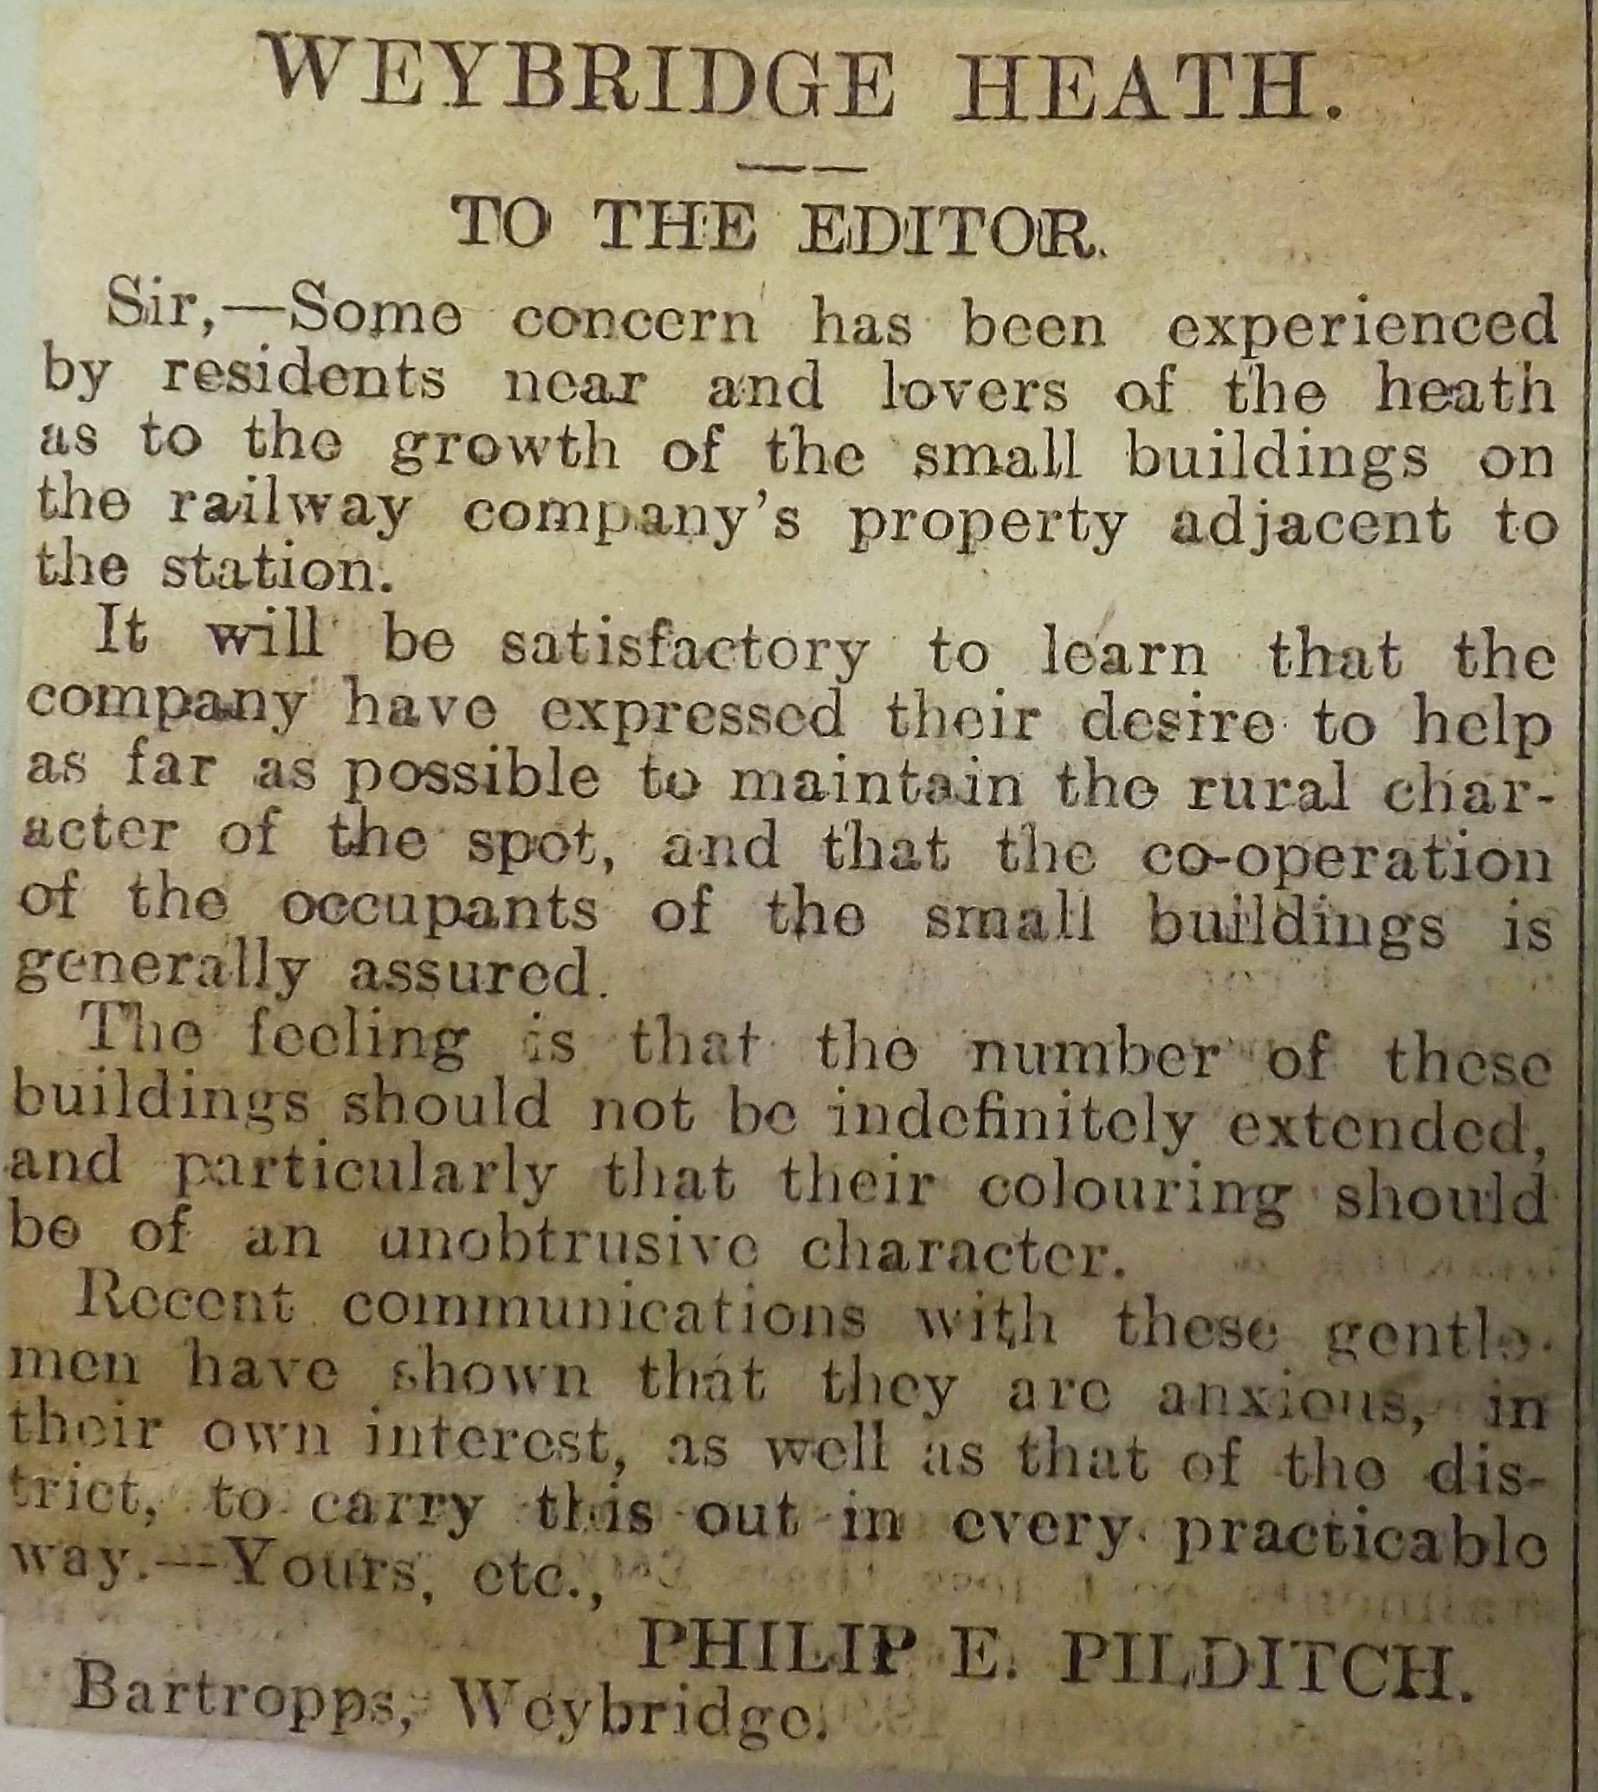 Article from a scrapbook compiled by Sir Philip Pilditch of articles, letters and news cuttings relating to Weybridge Heath, The Commons Preservation Society and the Weybridge Poors Allotments. The article raises concerns about building over and developing common land. It is dated May 1930.